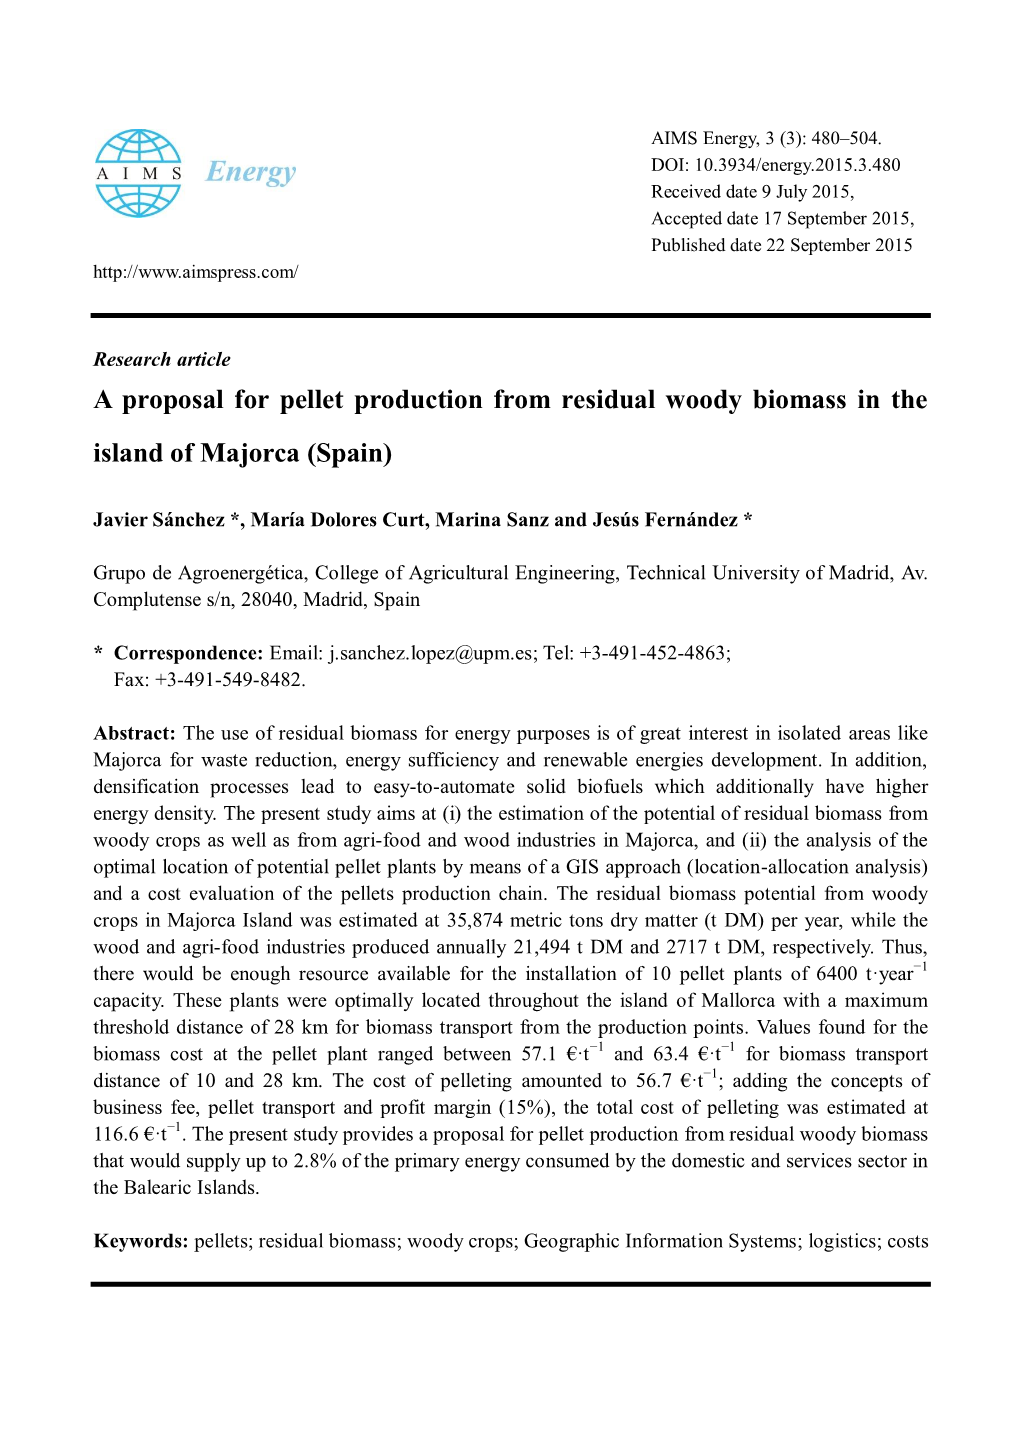 A Proposal for Pellet Production from Residual Woody Biomass in the Island of Majorca (Spain)